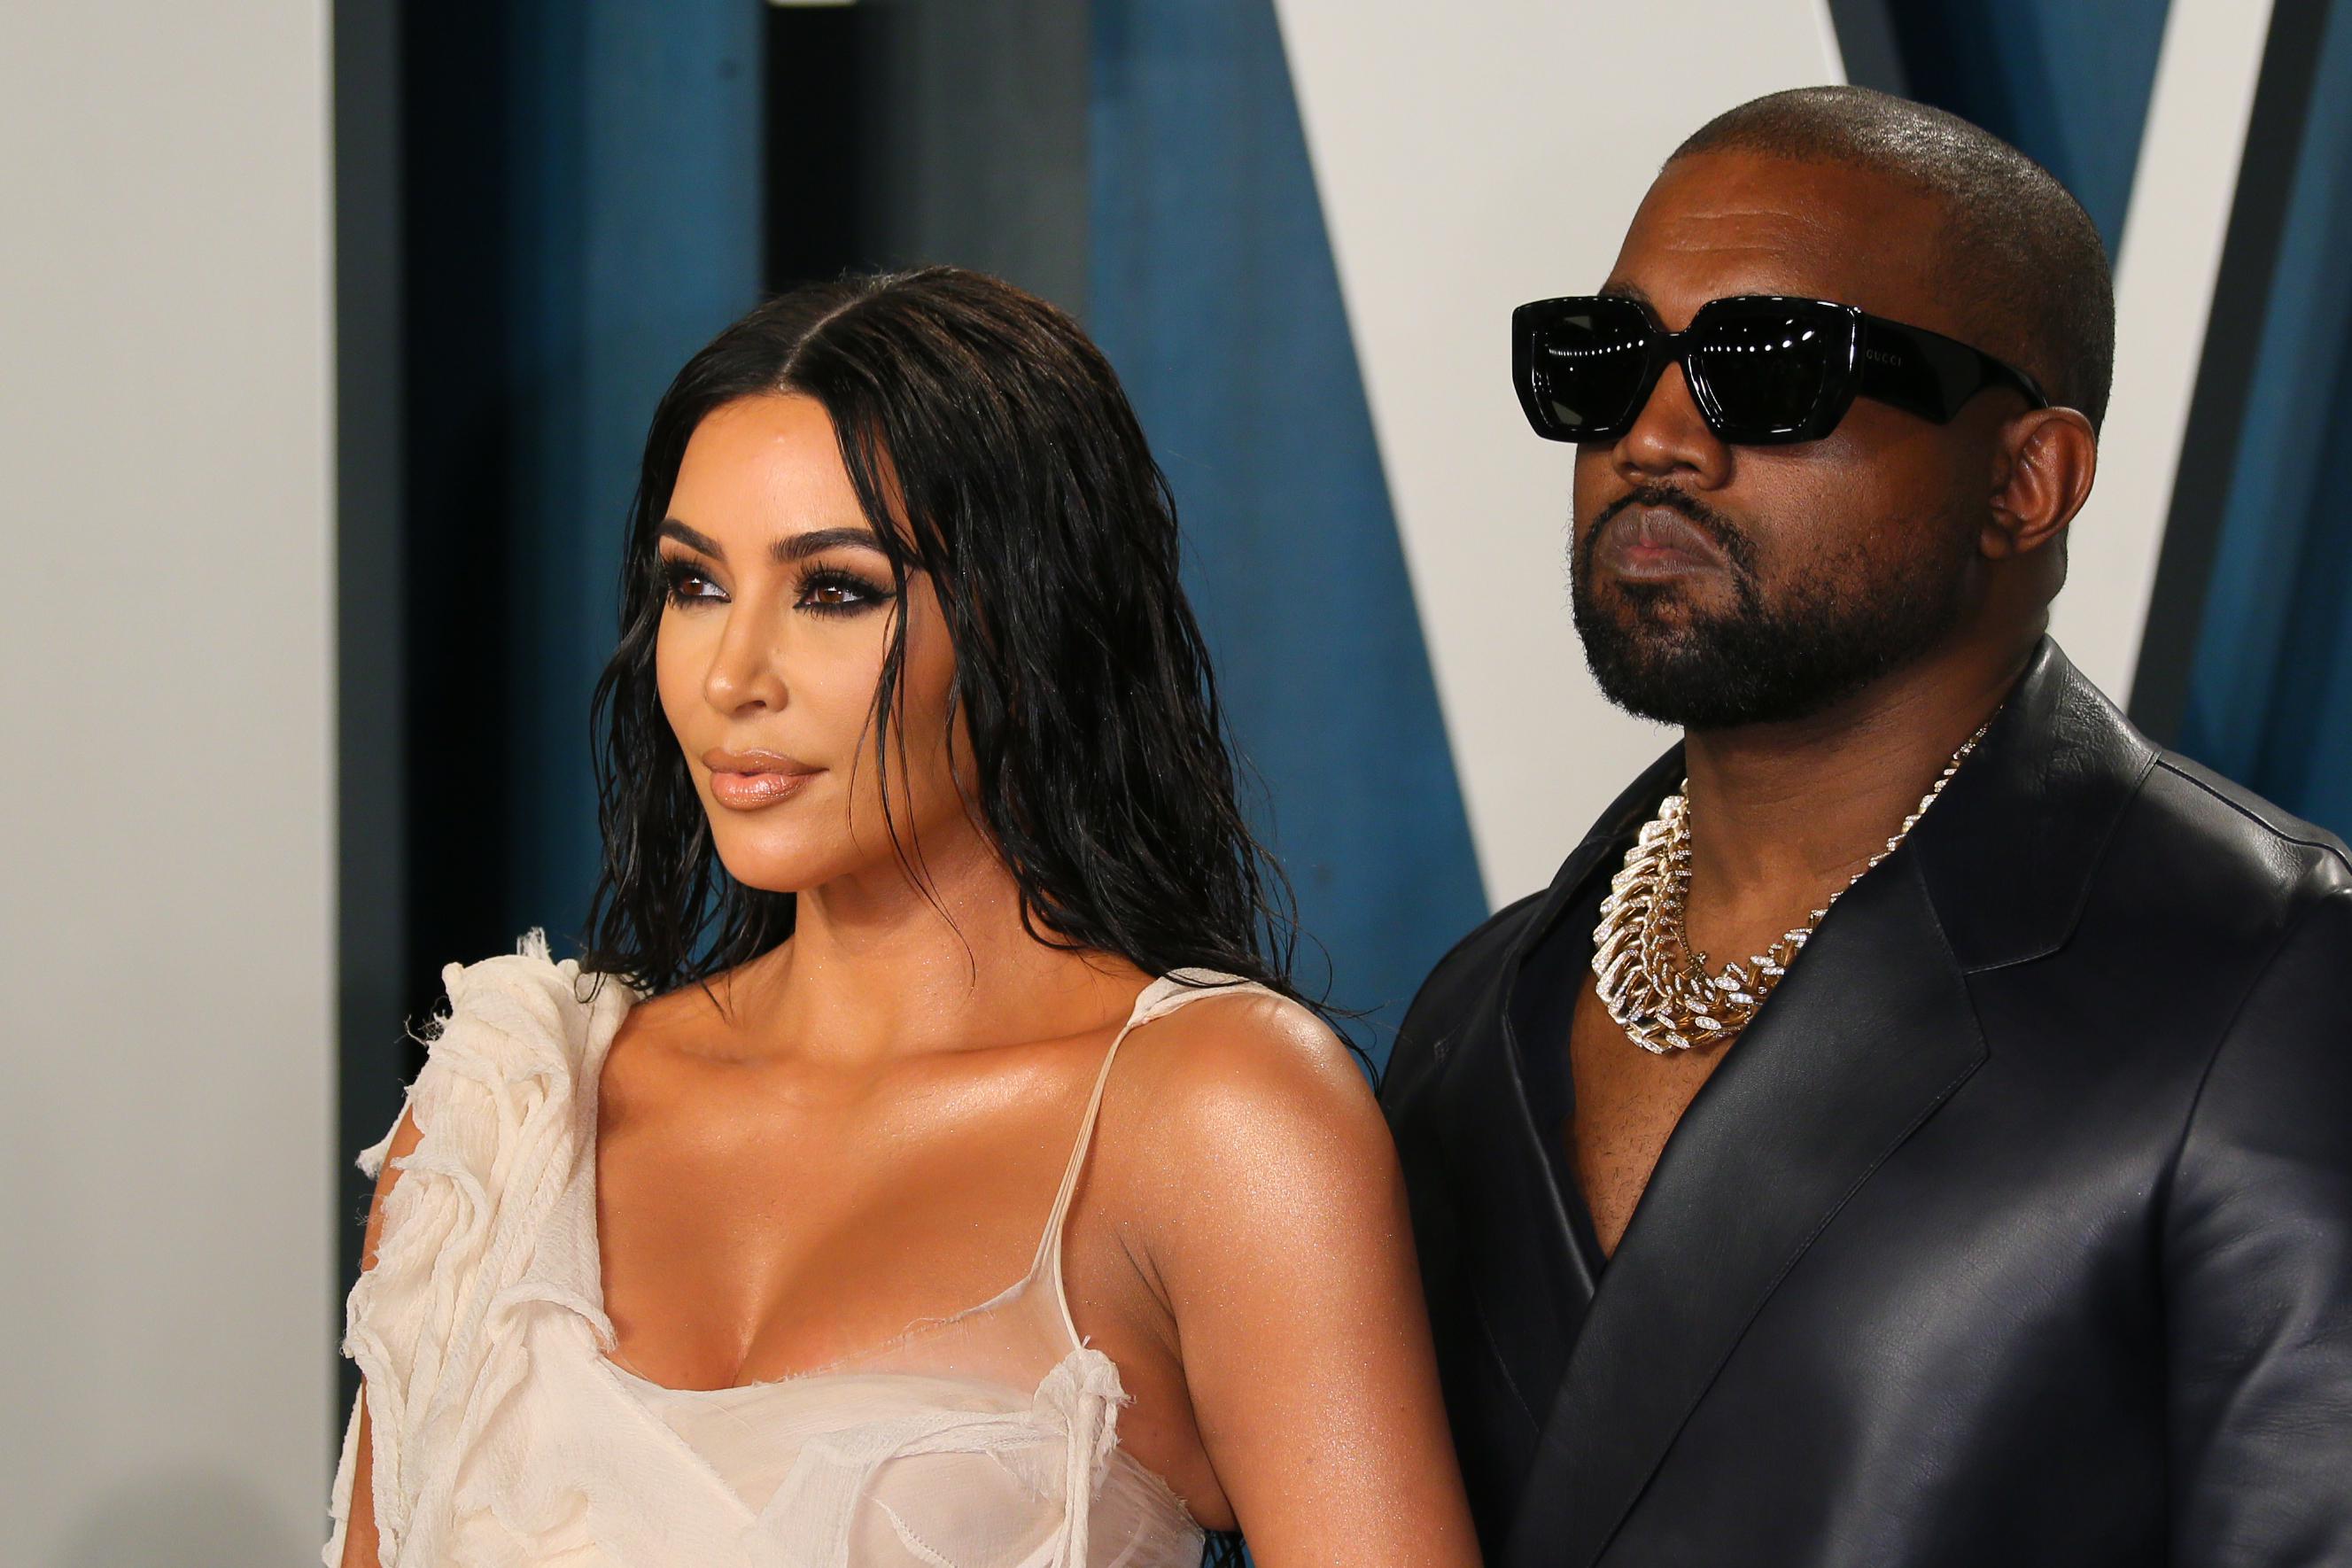 Kim Kardashian standing to the left of Kanye West, in formalwear in front of the Vanity Fair logo at the magazine's 2020 Oscar party. Both are seen from the chest up looking away from the camera, with hard to read expressions on their faces.